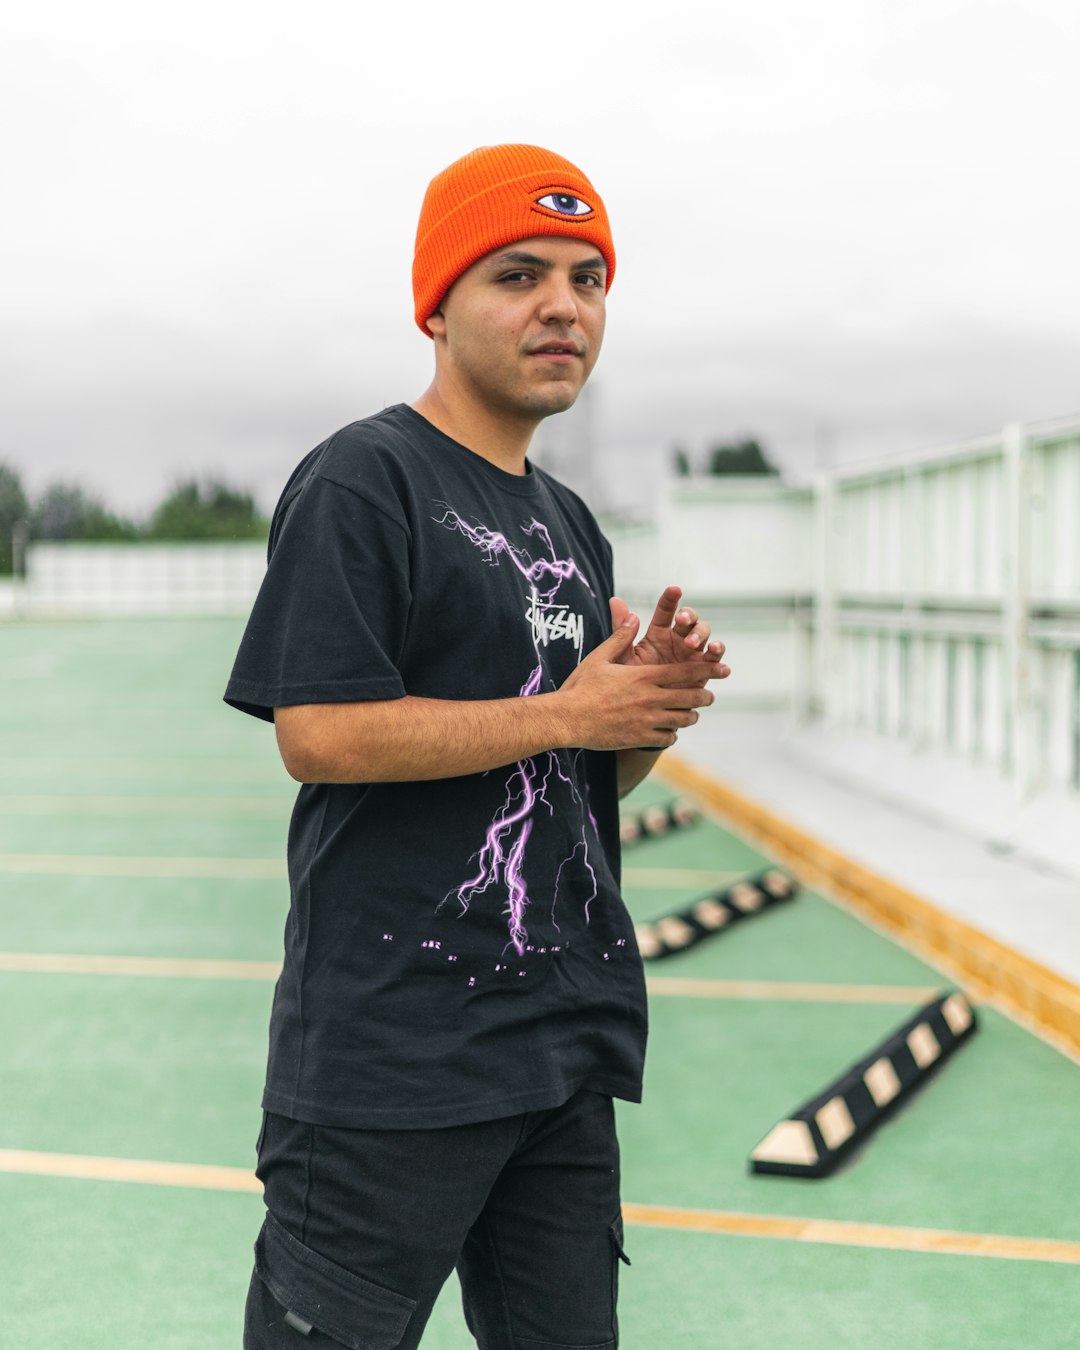 man in black crew neck t-shirt and orange cap standing on track field during daytime